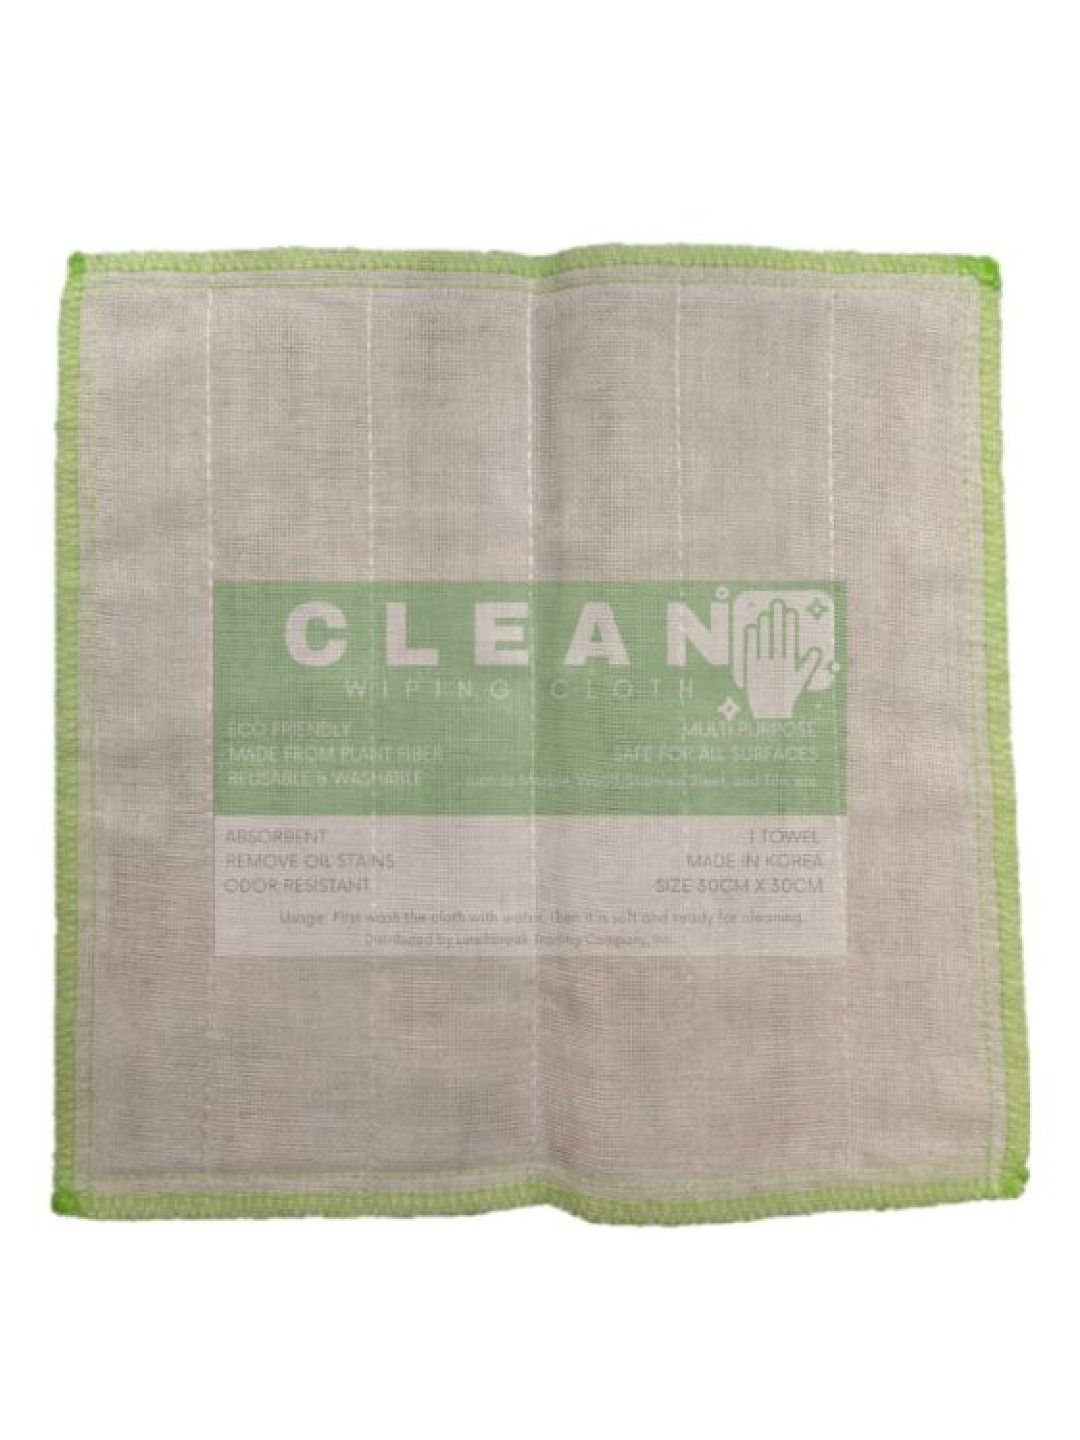 Keeps CLEAN Wiping Cloth